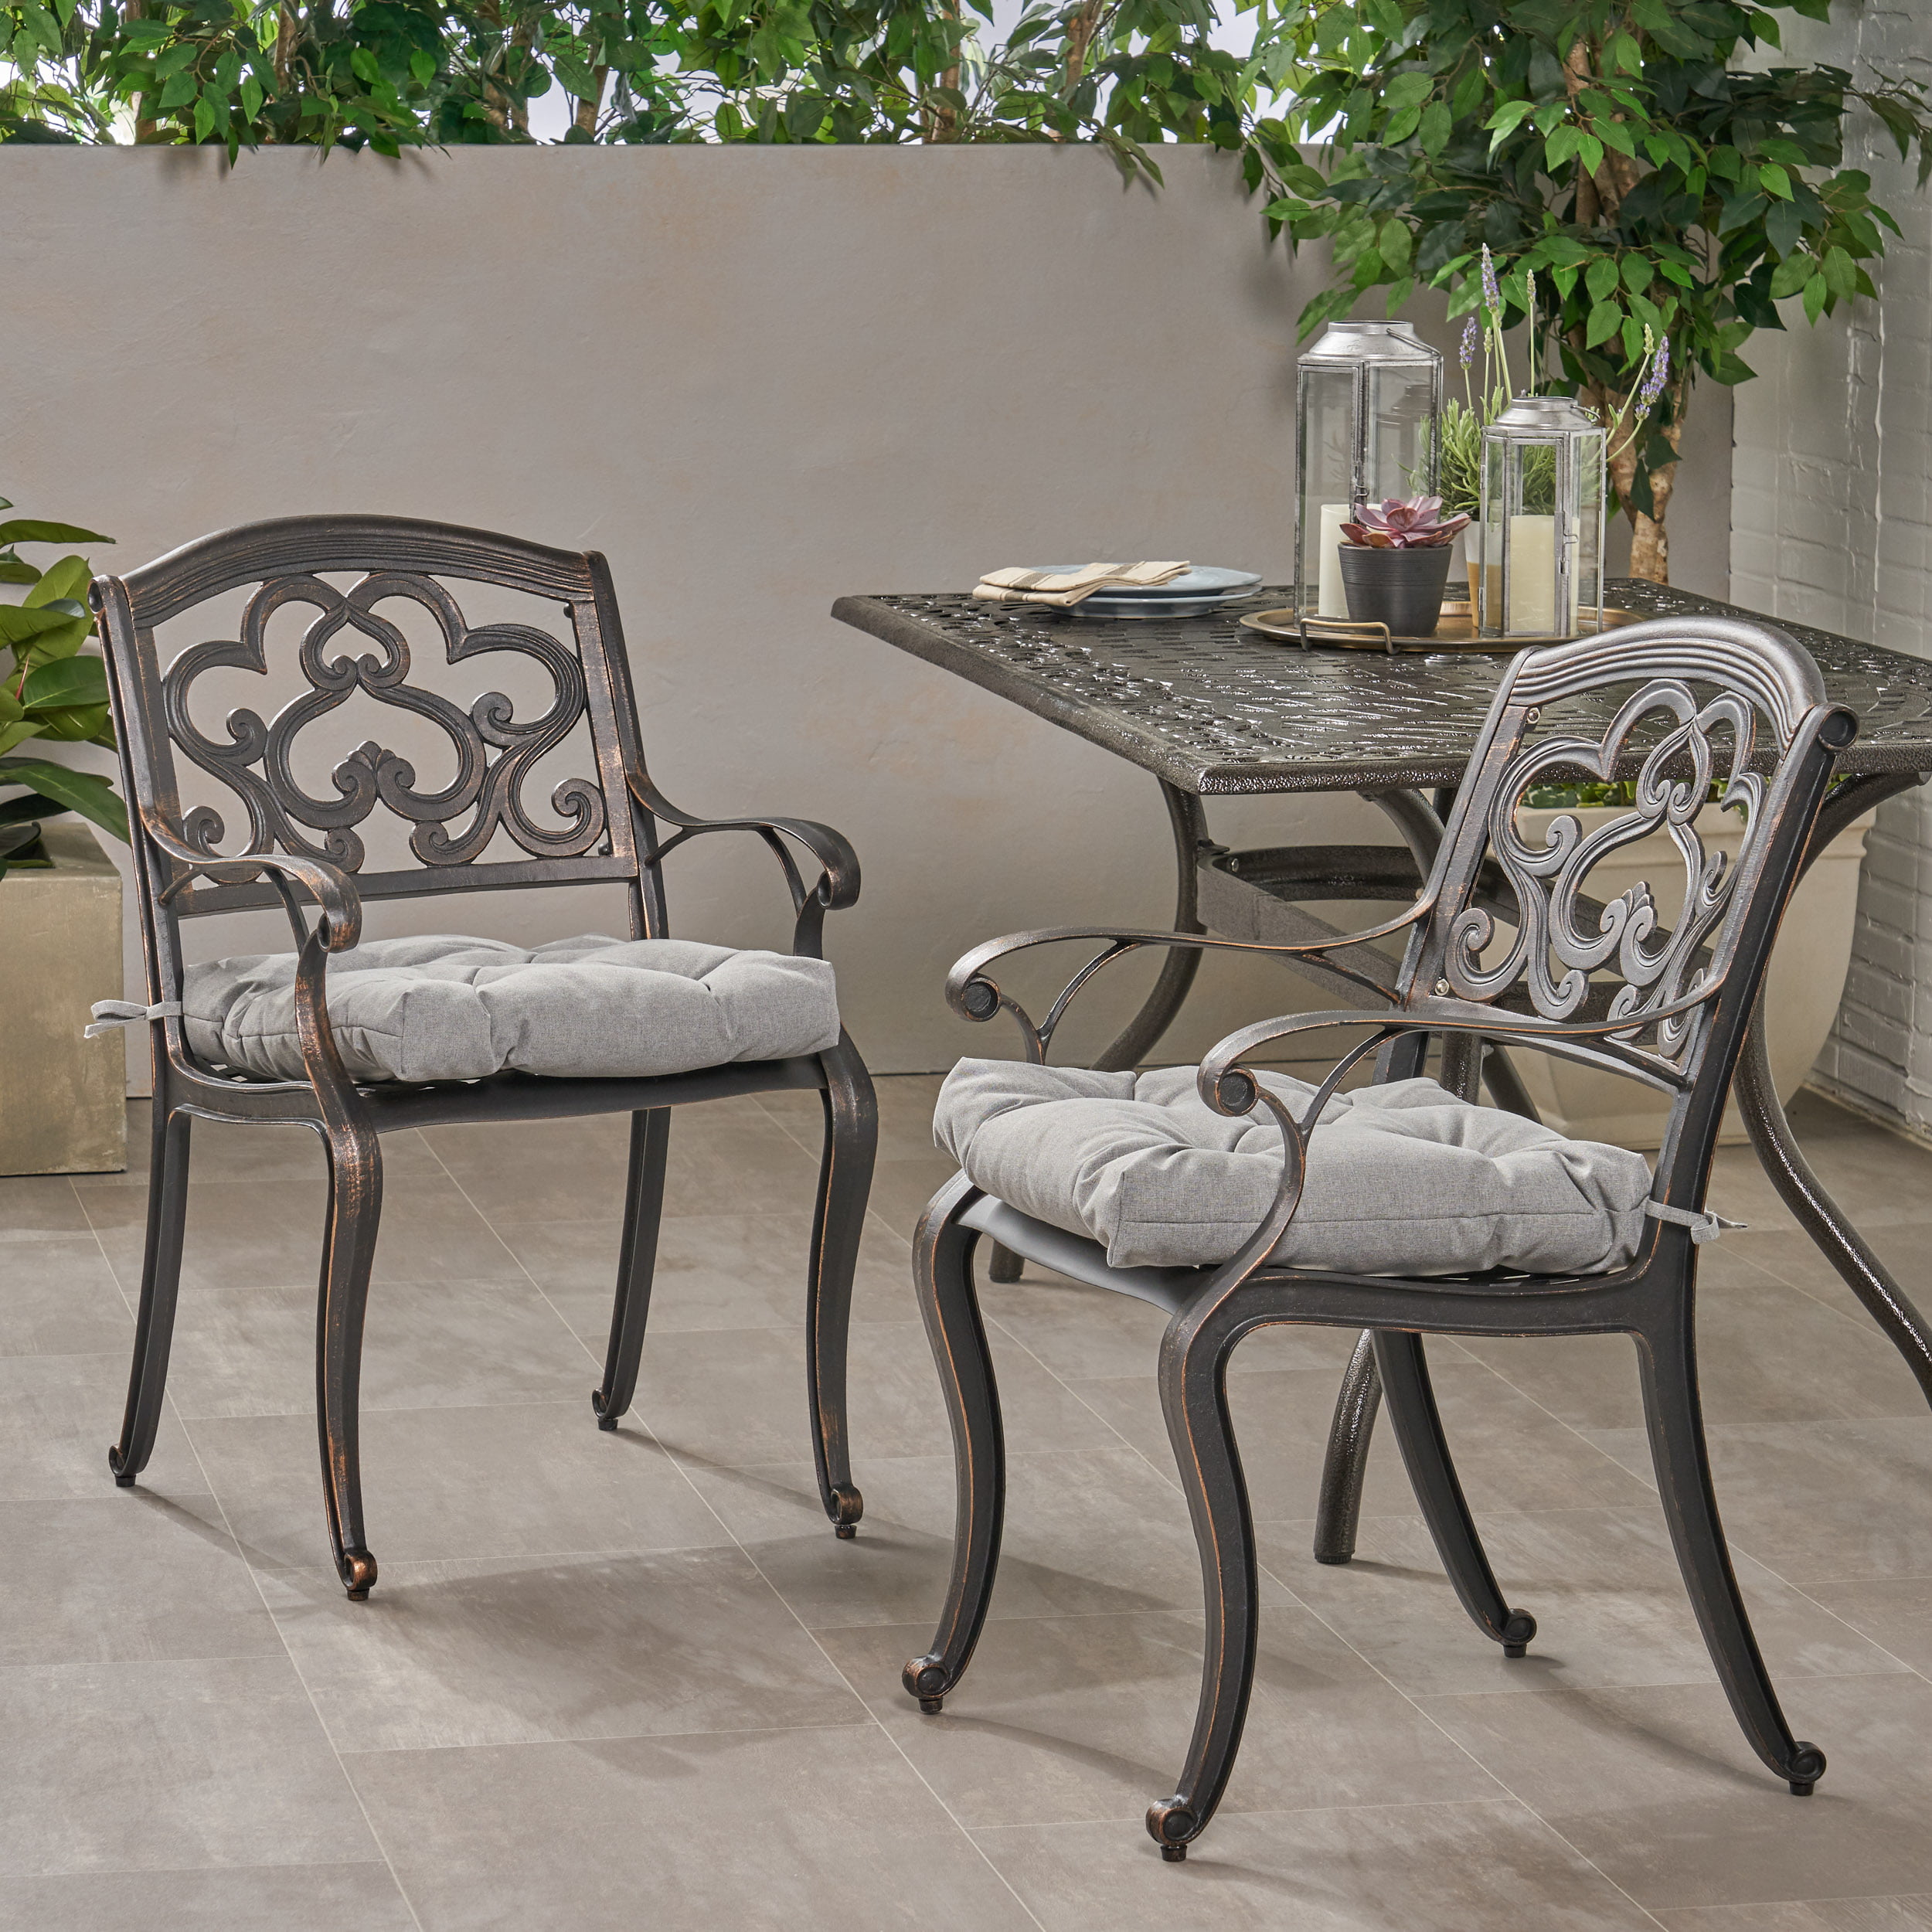 Set of 2 Carlton Outdoor Dining Chair with Cushion